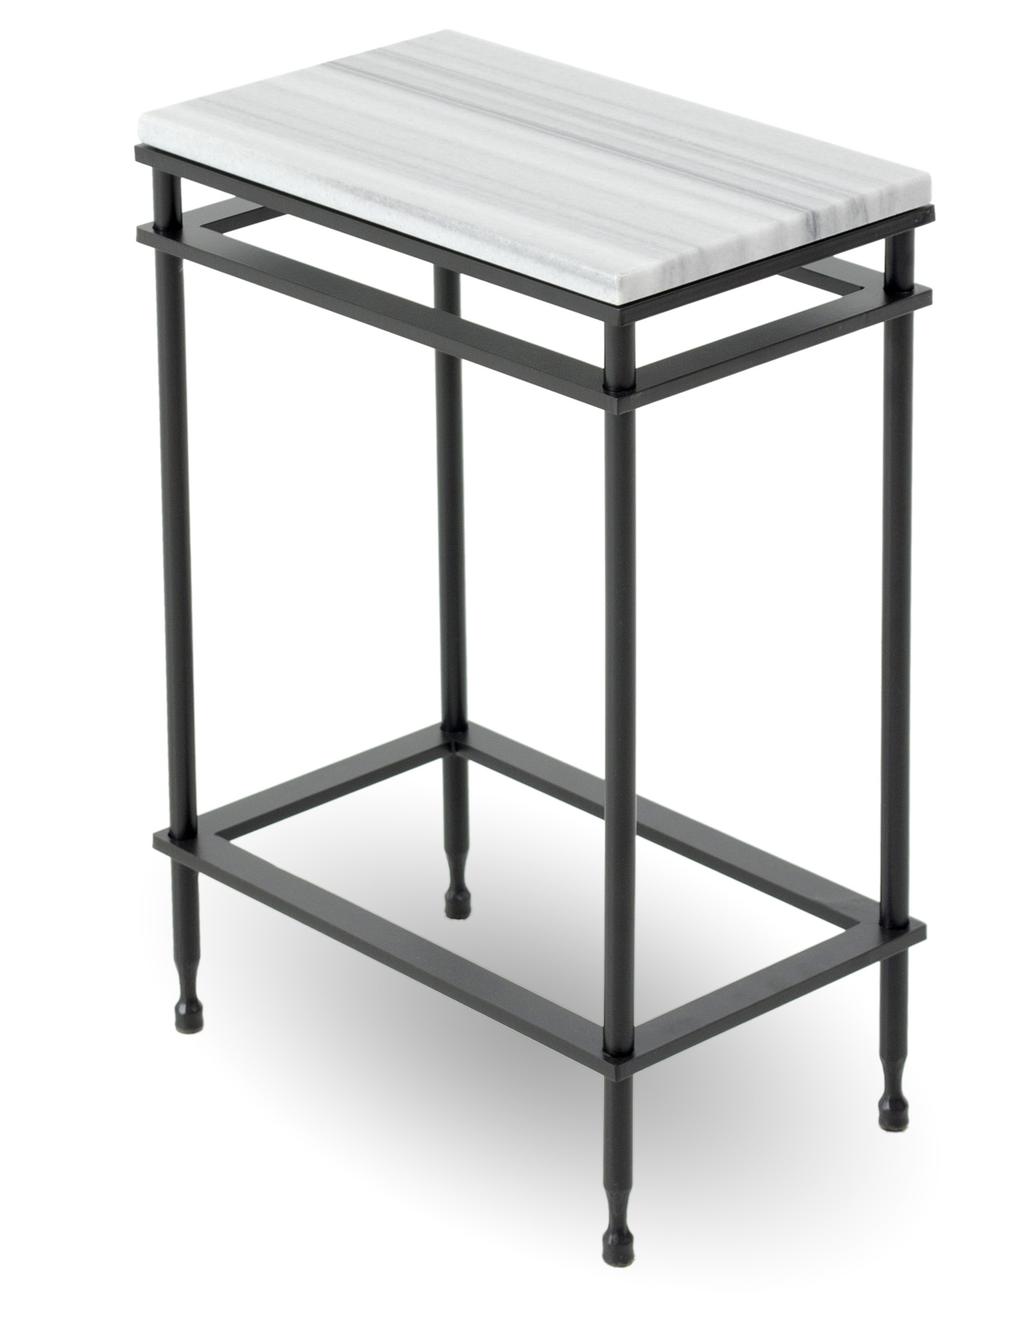 CF Finds Limited Edition Tops 7499 Limited Edition Empire Drink Table with White Stria top Table w 15 x d 9" x h 21½ Shown in Charcoal finish (73) with a limited edition White Stria top.